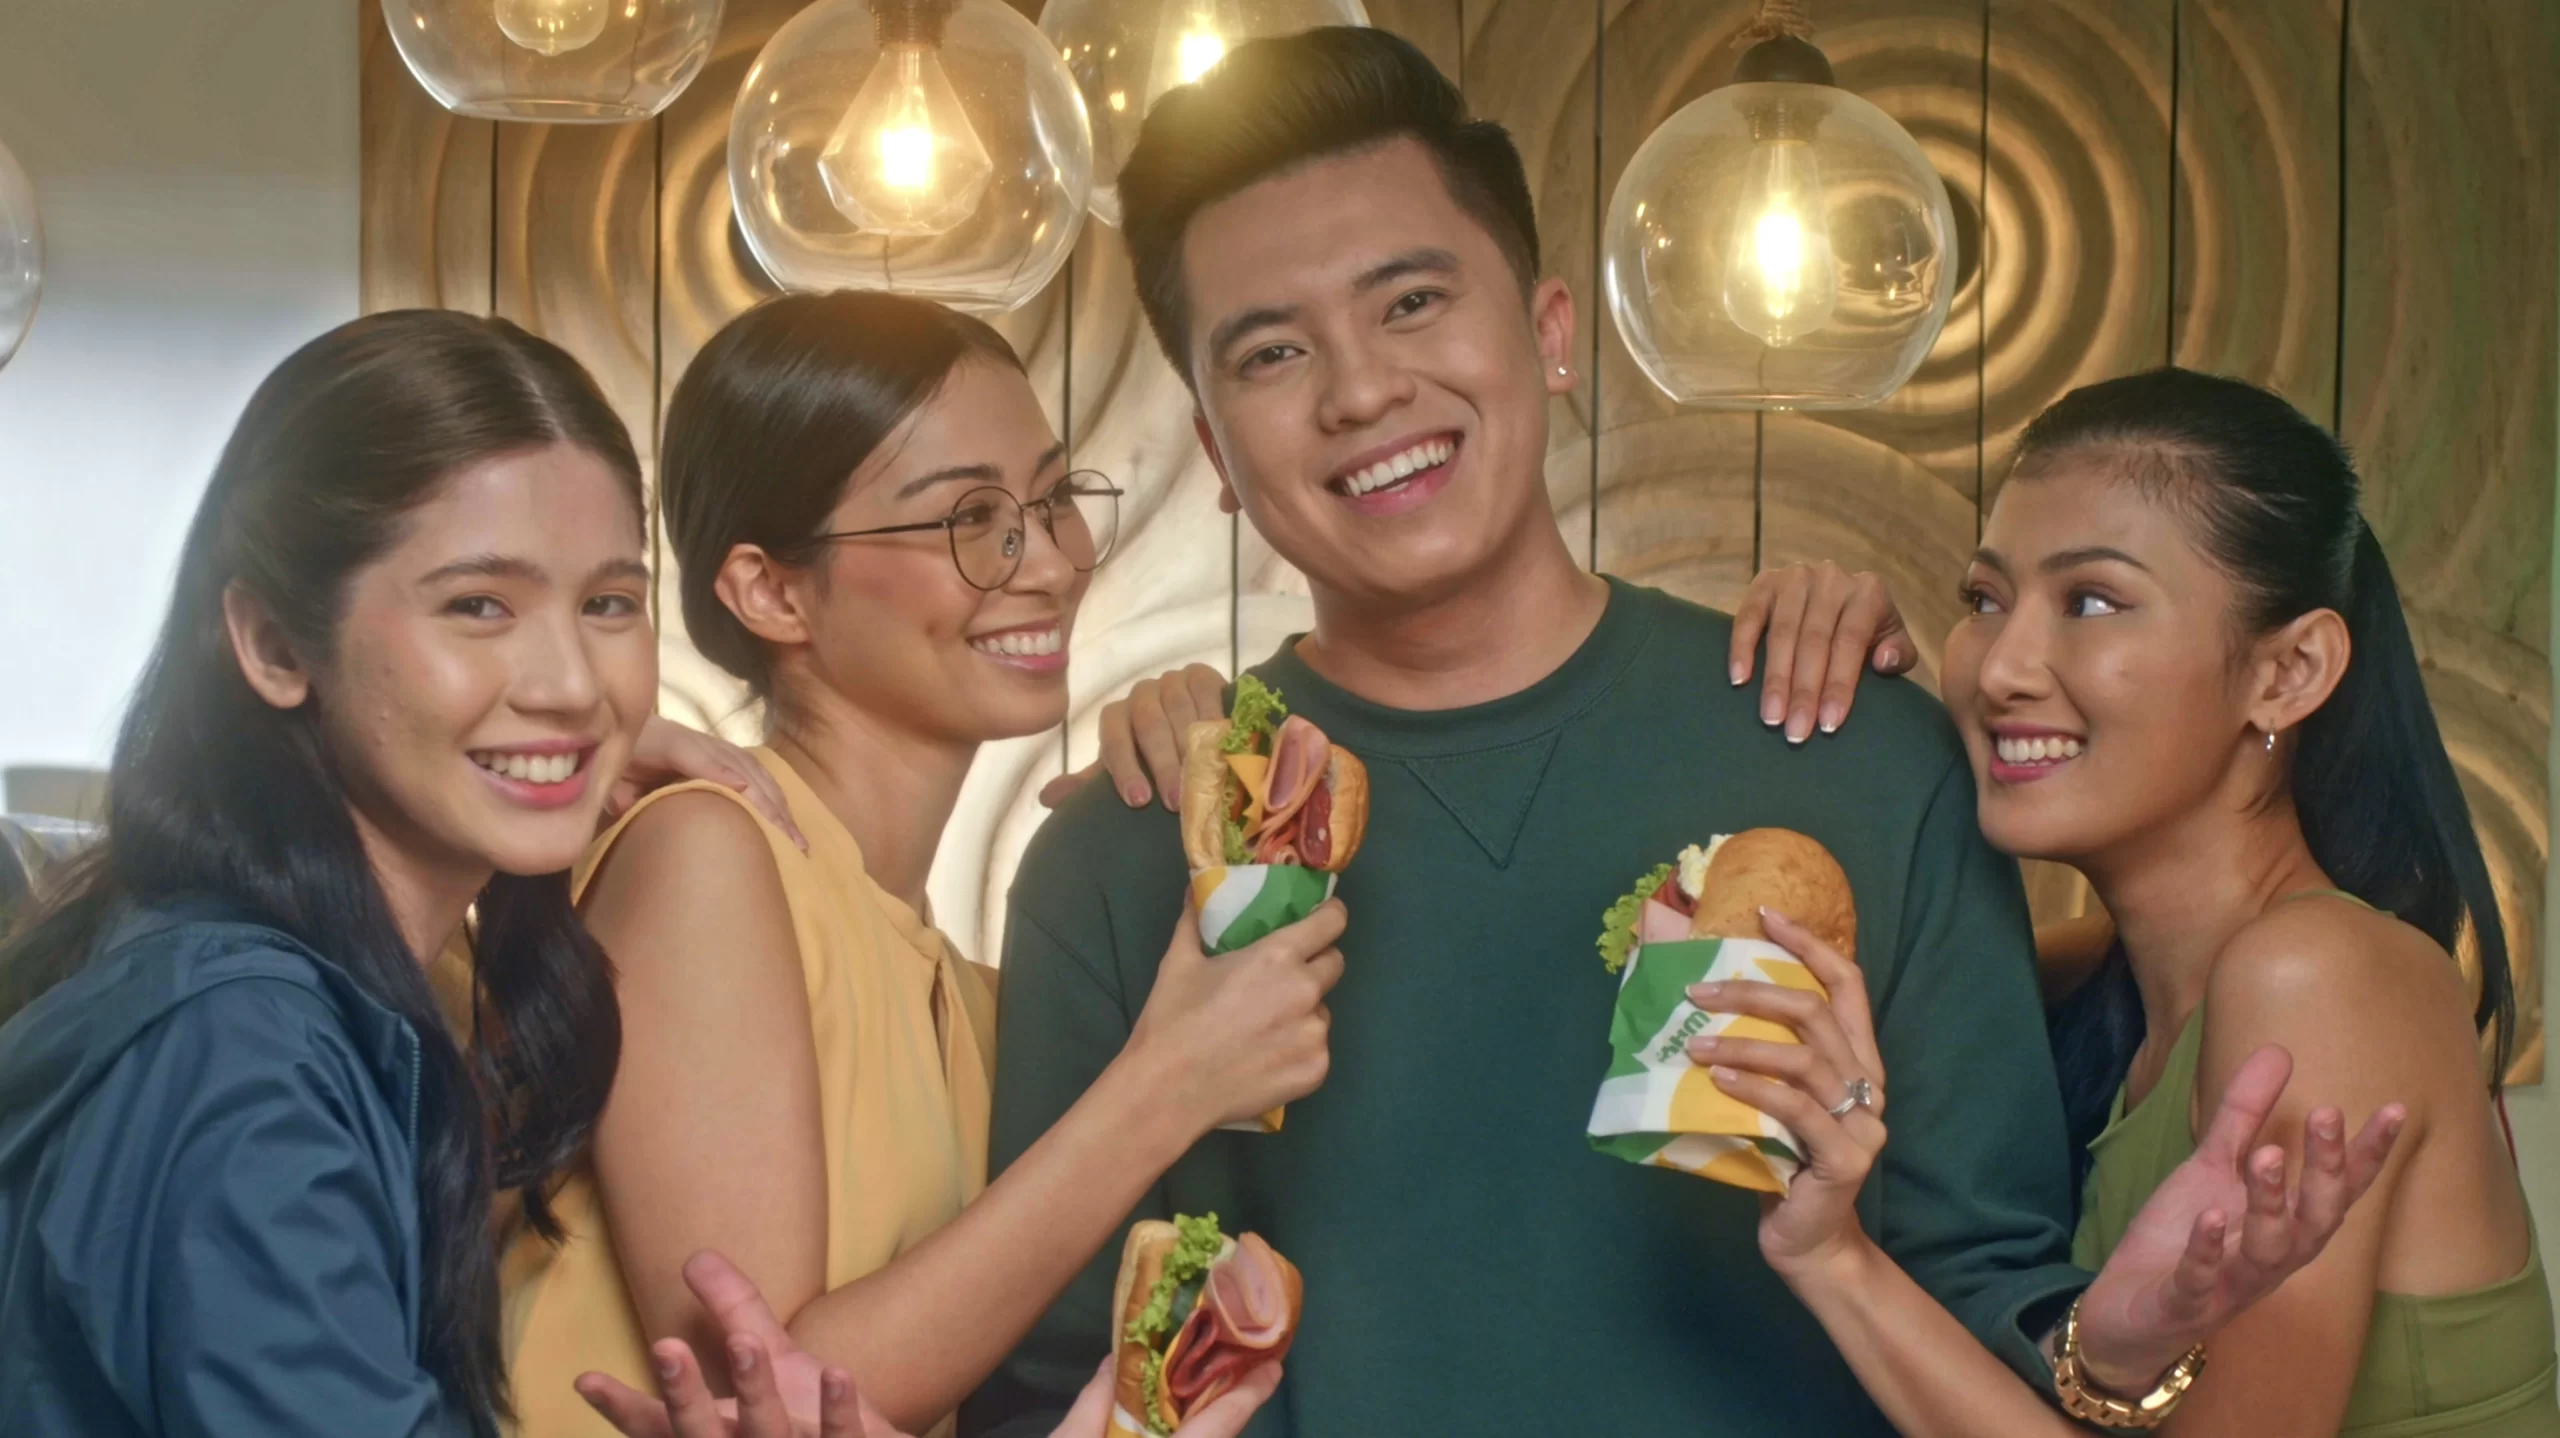 The commercial perfectly highlights the variety one gets from Subway®’s three B.M.T.™ options.